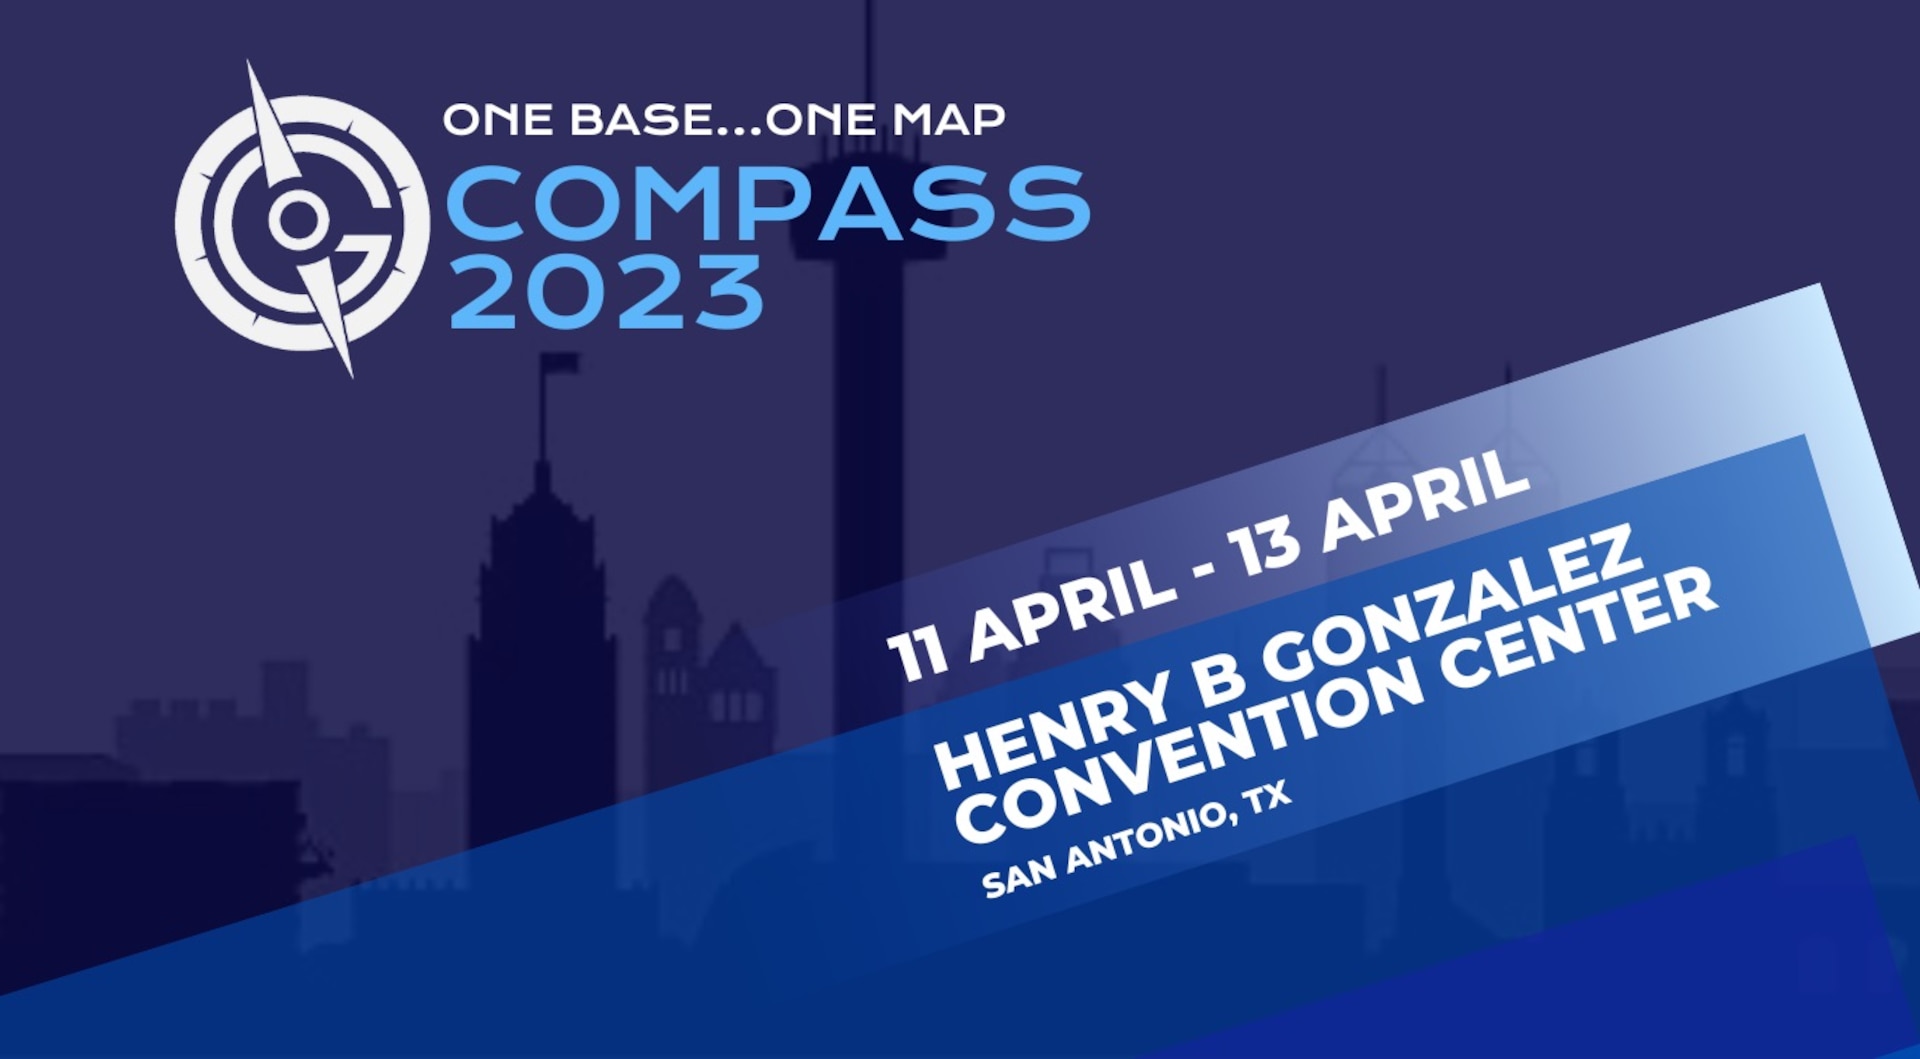 Compass 2023 presents week of learning, sharing geospatial solutions April 11-14